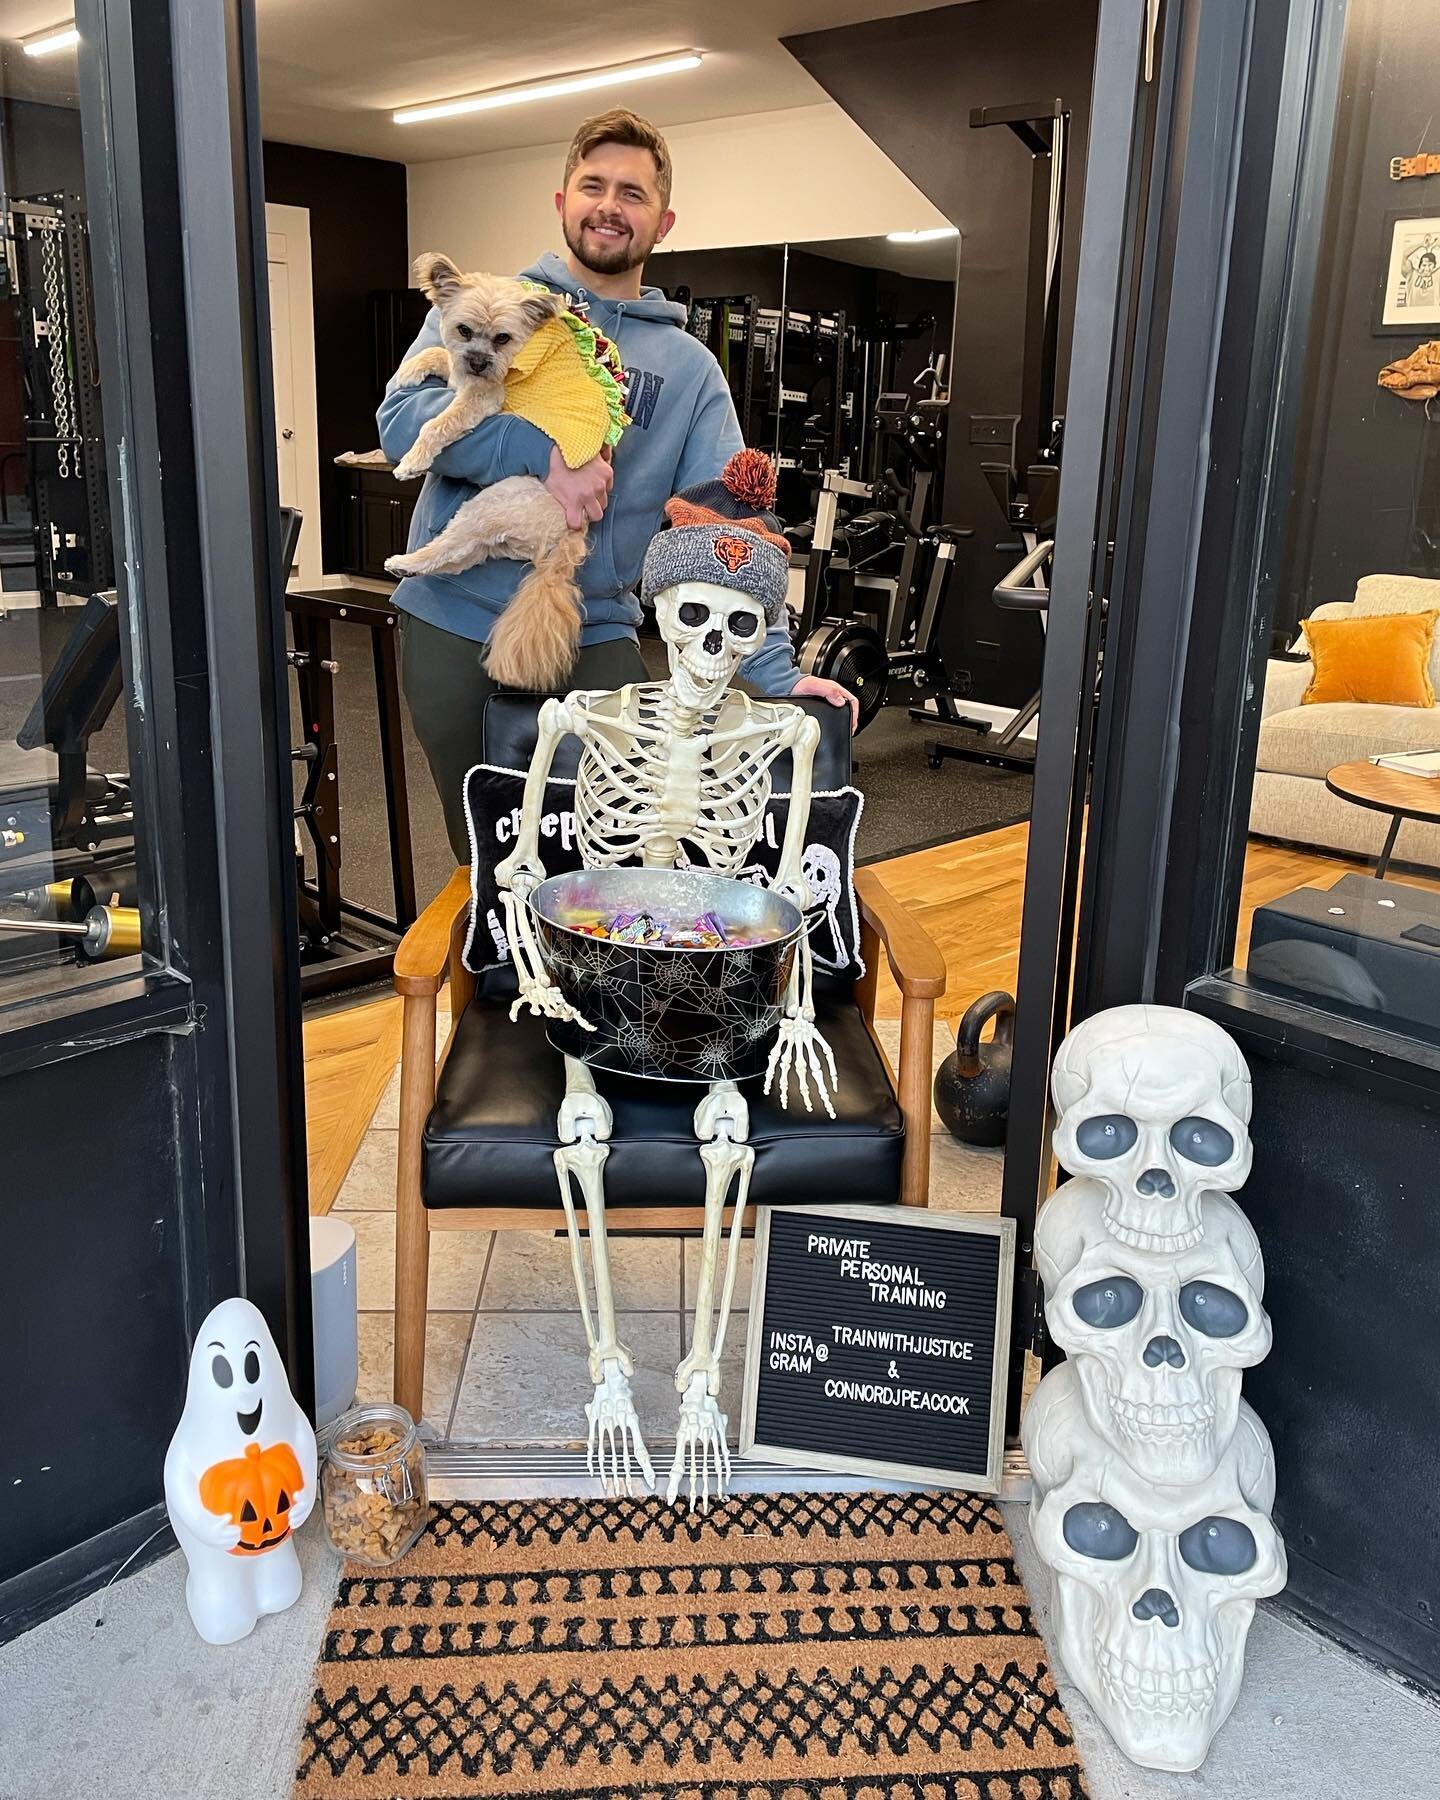 Happy Halloween from our family to yours!!! We hope everyone is having a fun and safe night! We loved seeing all the kiddos (and pups) dressed up and enjoying the perfect weather. 👻🎃🍭#happyhalloween #trainwithjustice #cpeakperformance #bucktown #b